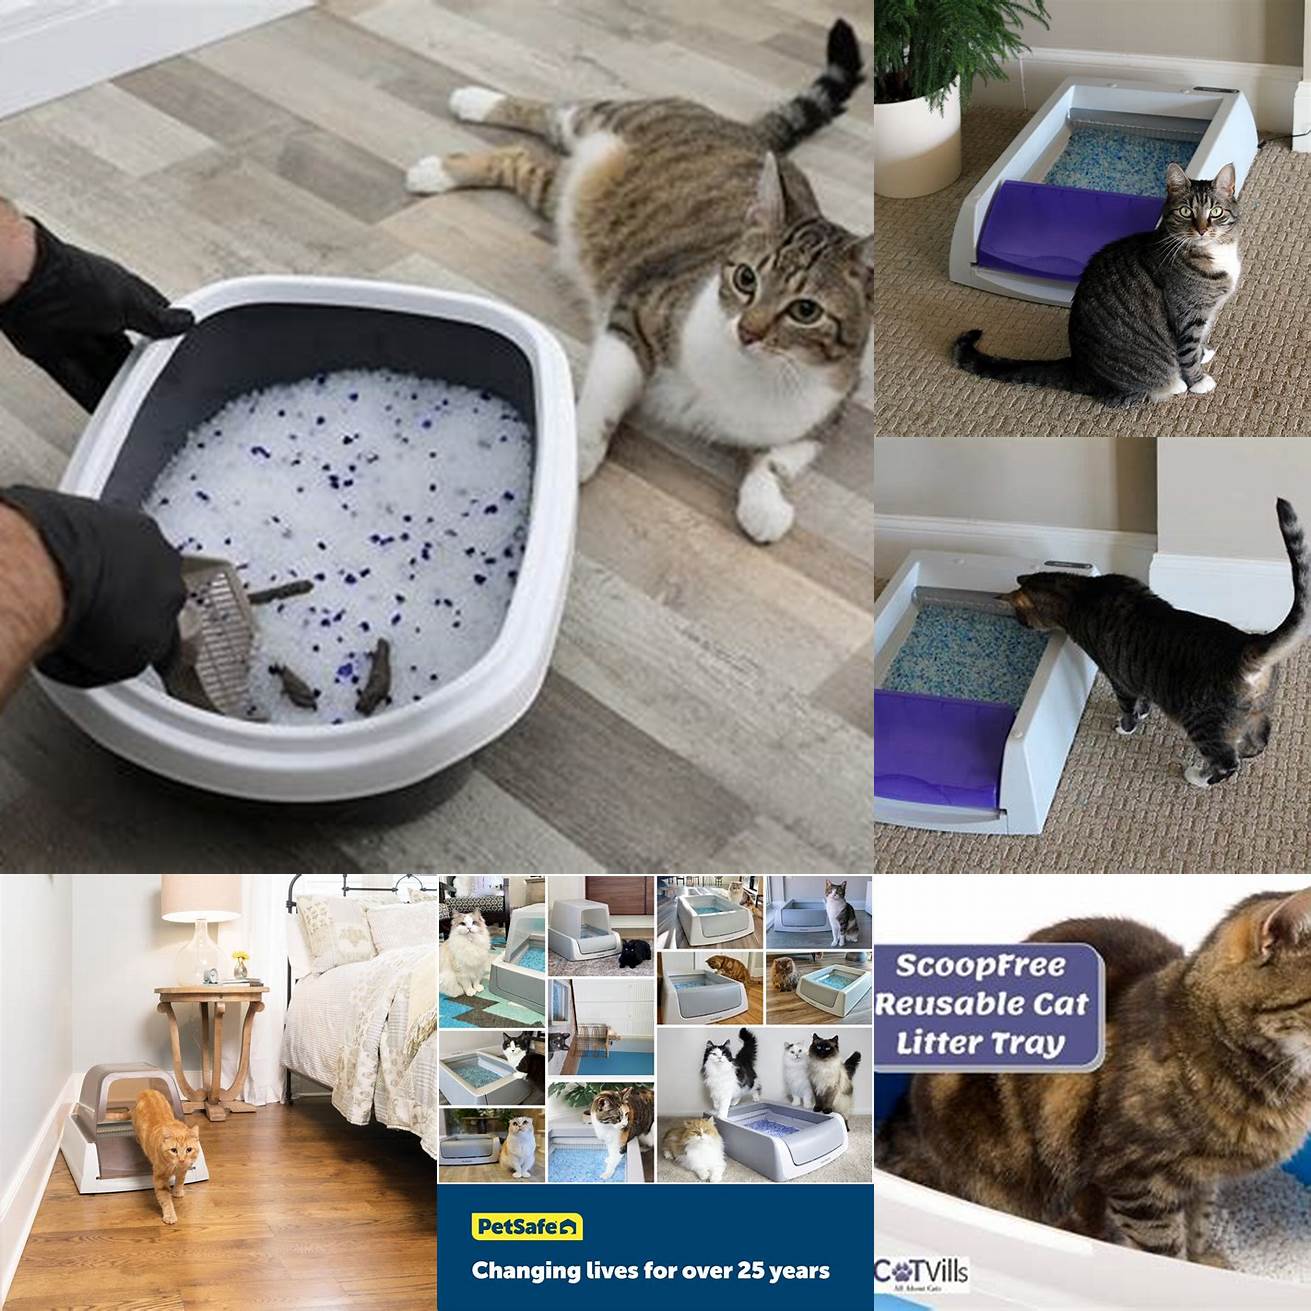 Reusable Cat litter can be reused multiple times during the cleanup process